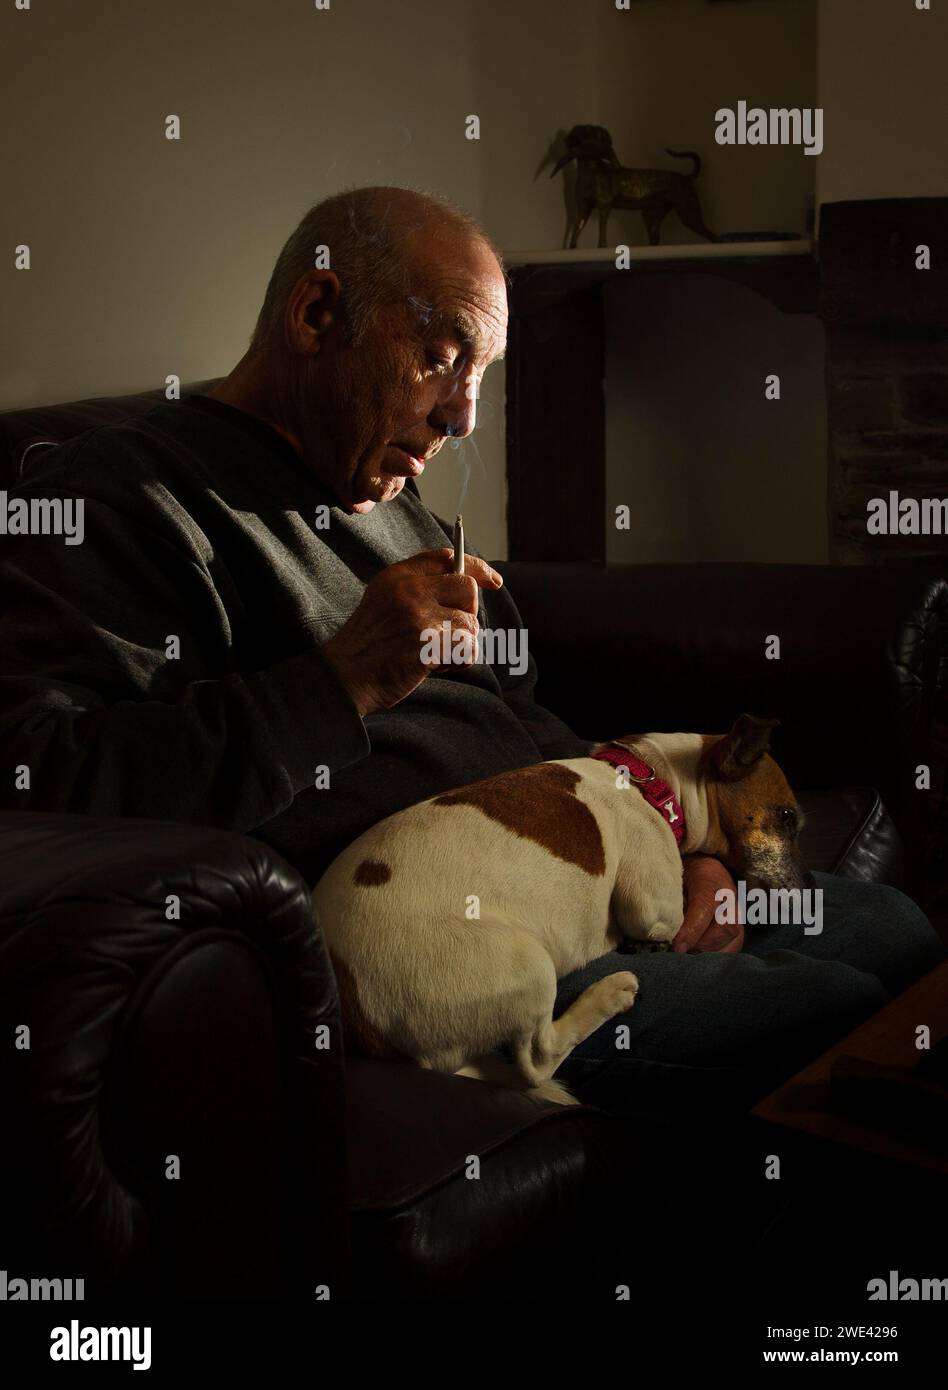 Old man alone with his pet dog Stock Photo